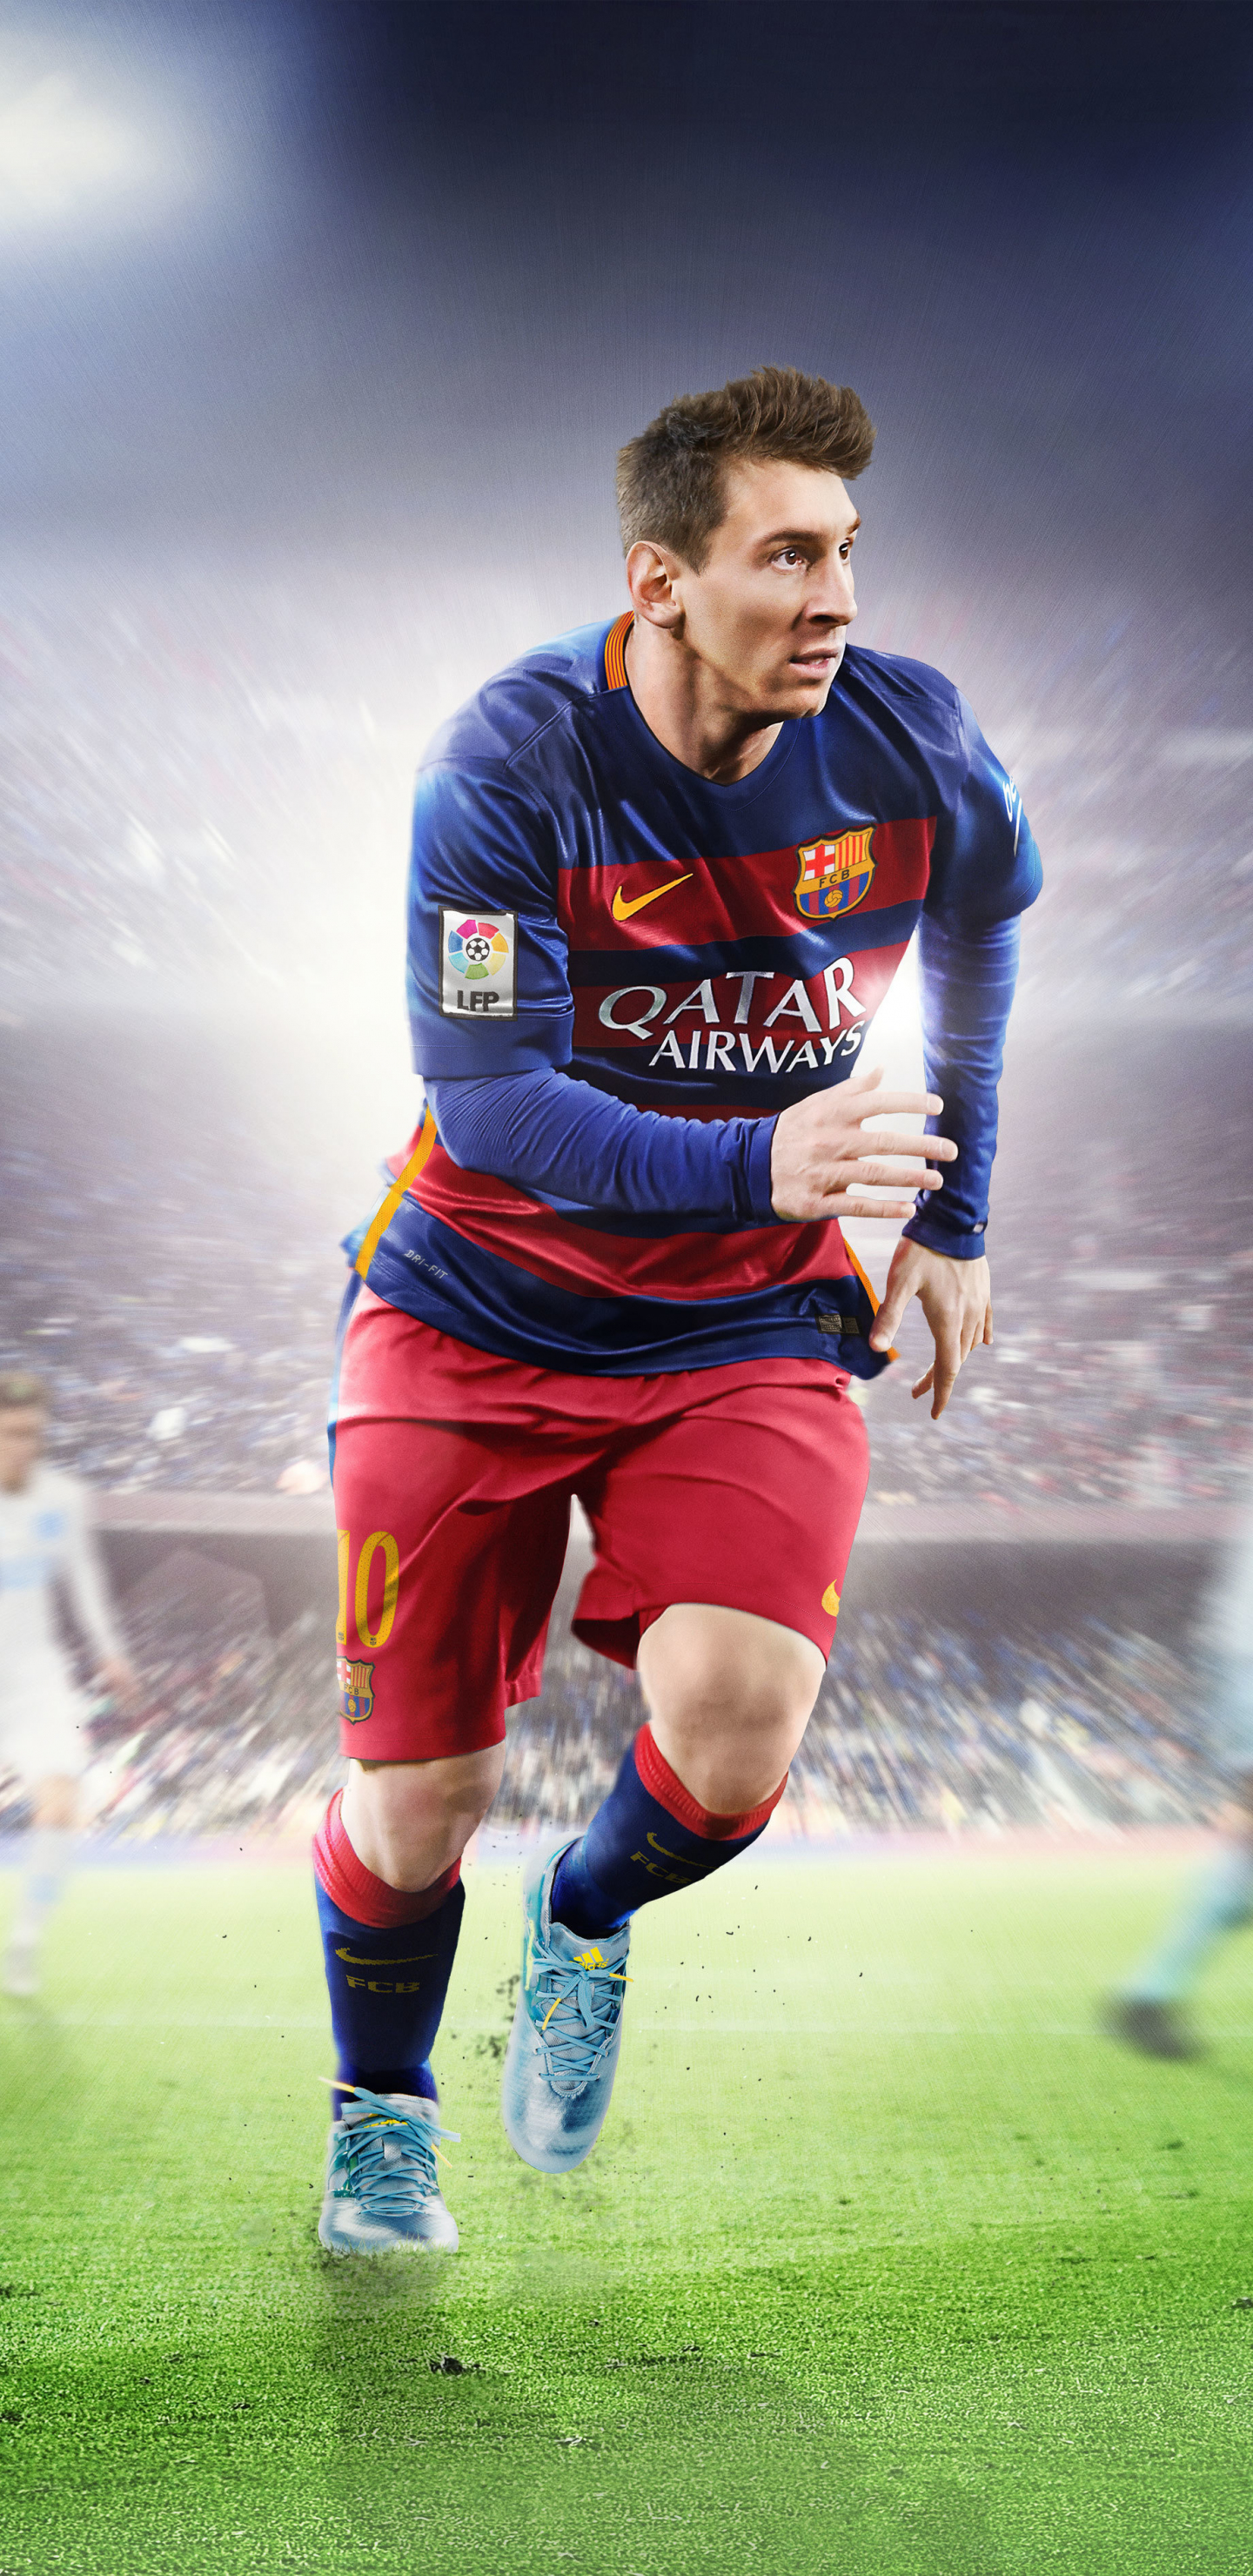 Download lionel messi, footballer, fifa ea sports, video game 1440x2960 wallpaper, samsung galaxy s samsung galaxy s8 plus, 1440x2960 HD image, background, 1012